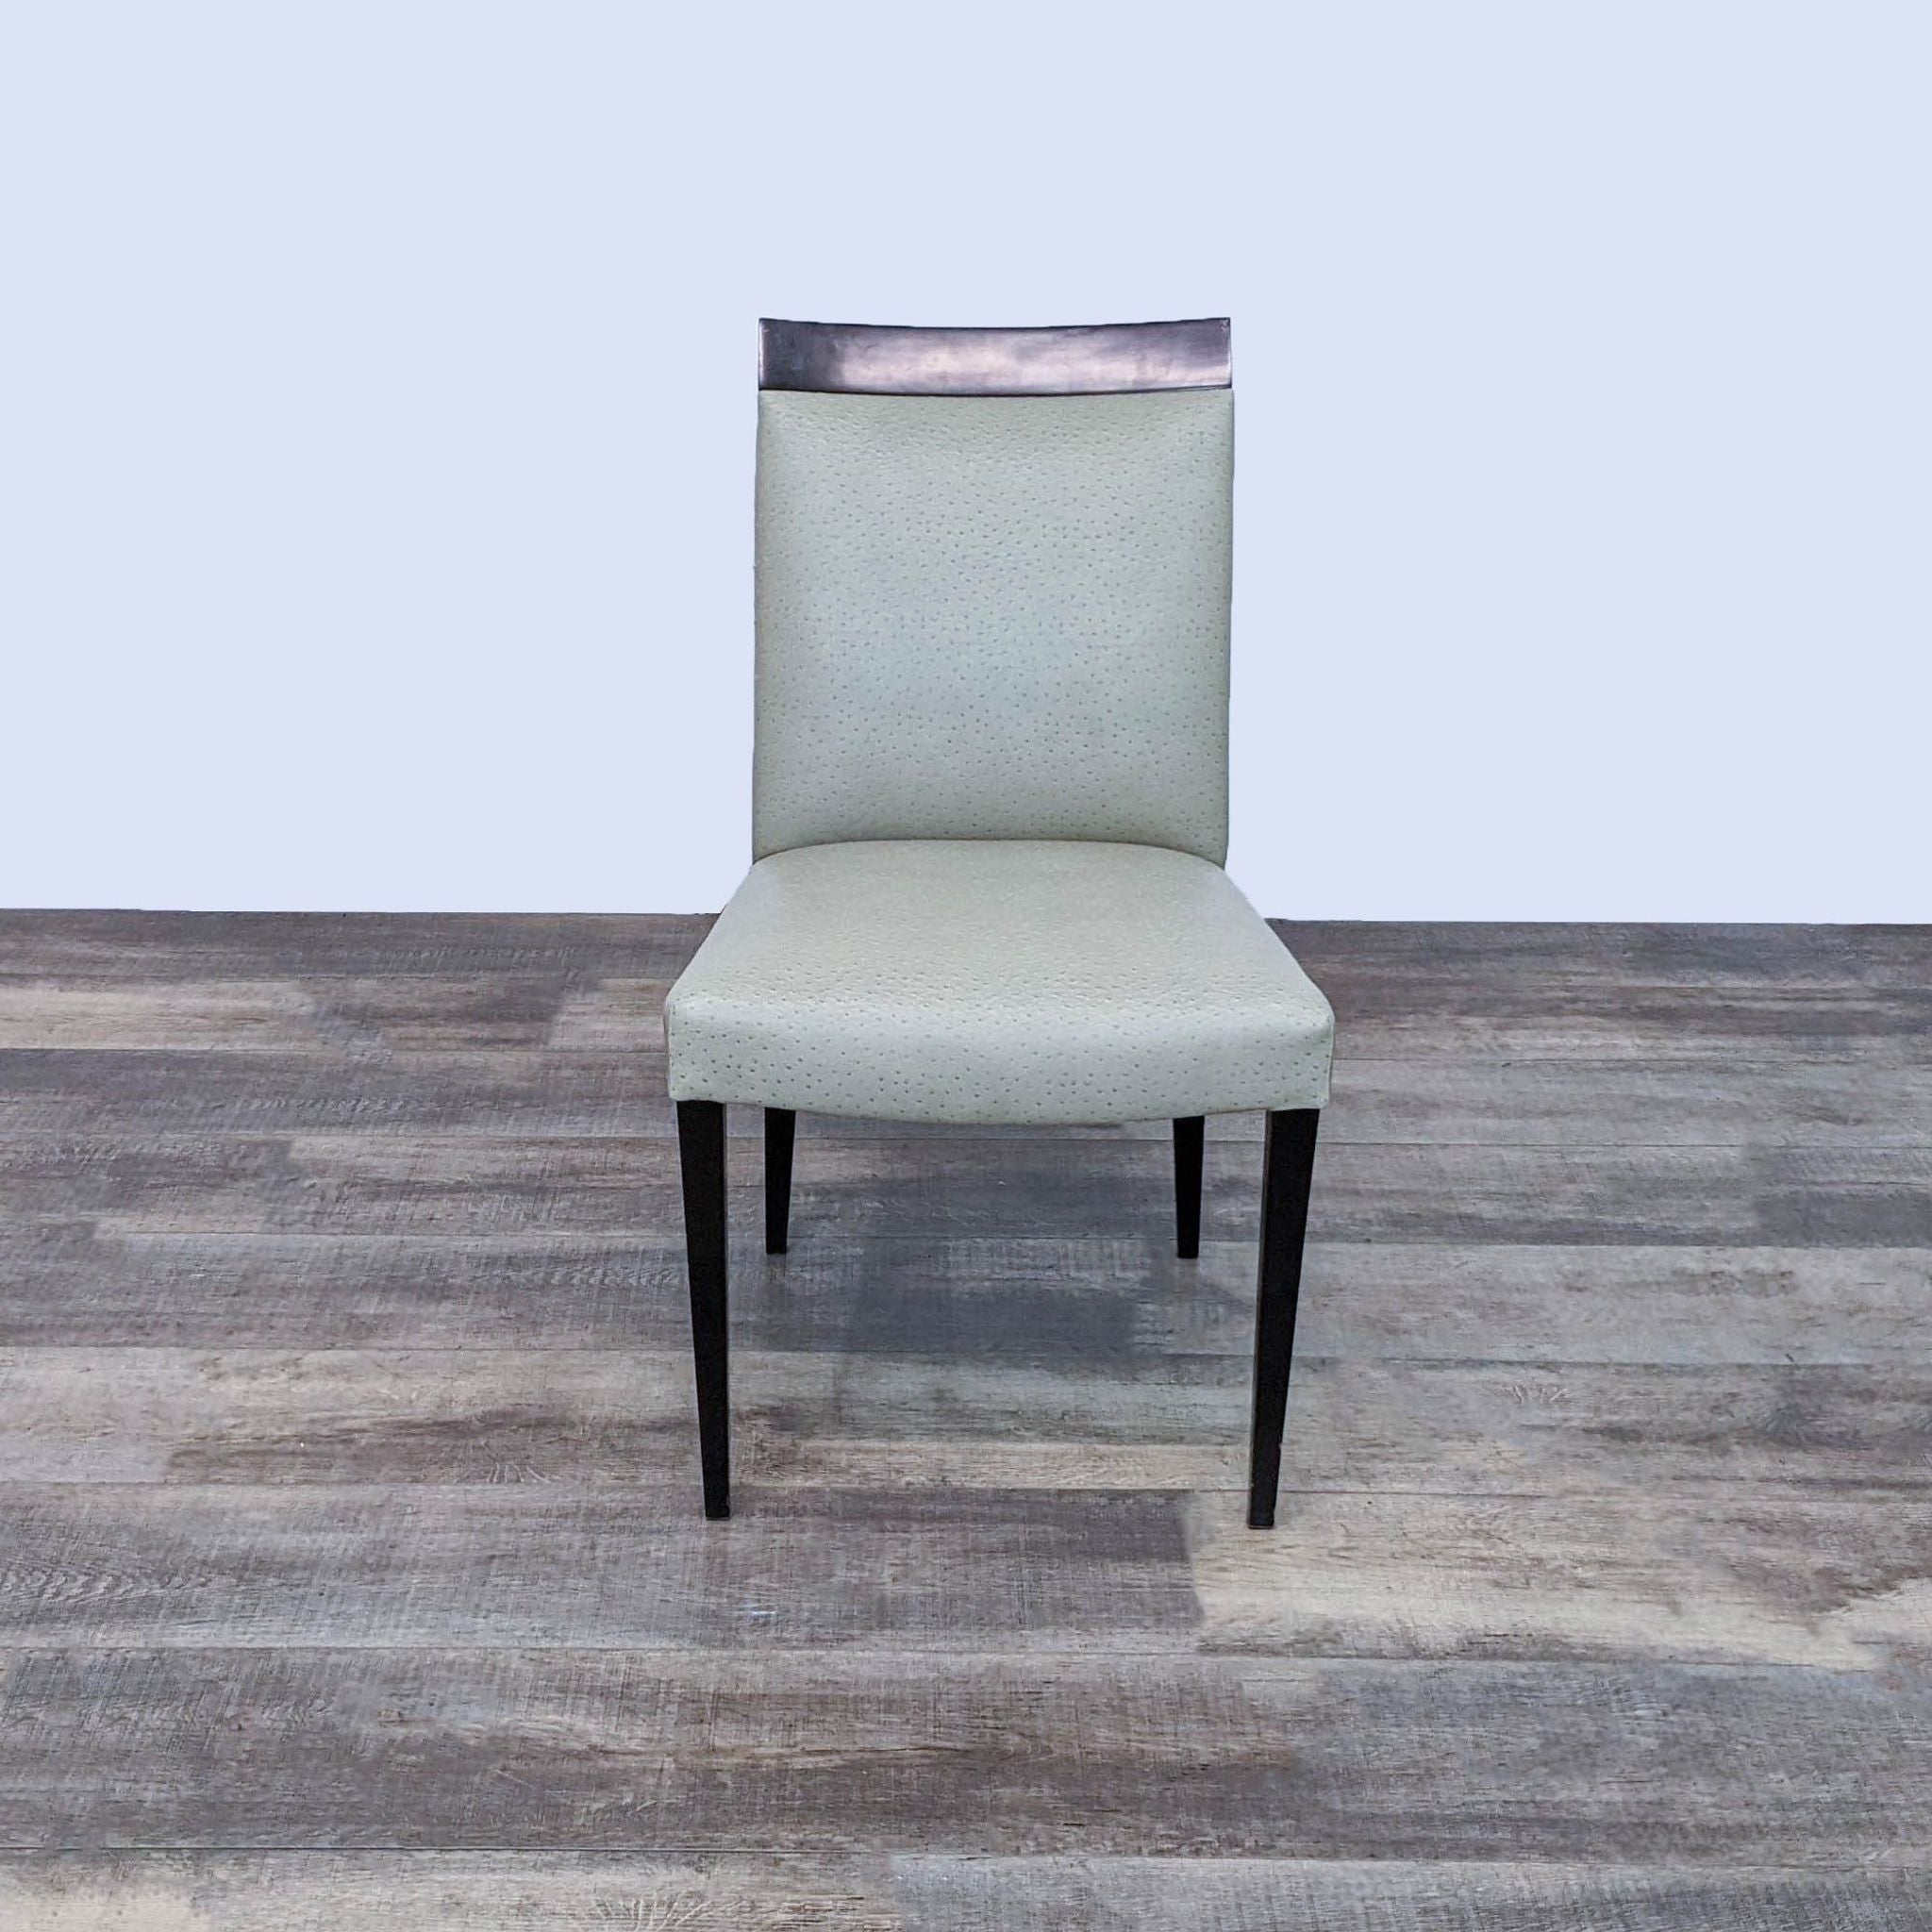 Reperch dining chair with tapered wood legs and a cushioned seat with brown leather top trim, on wood-style flooring.